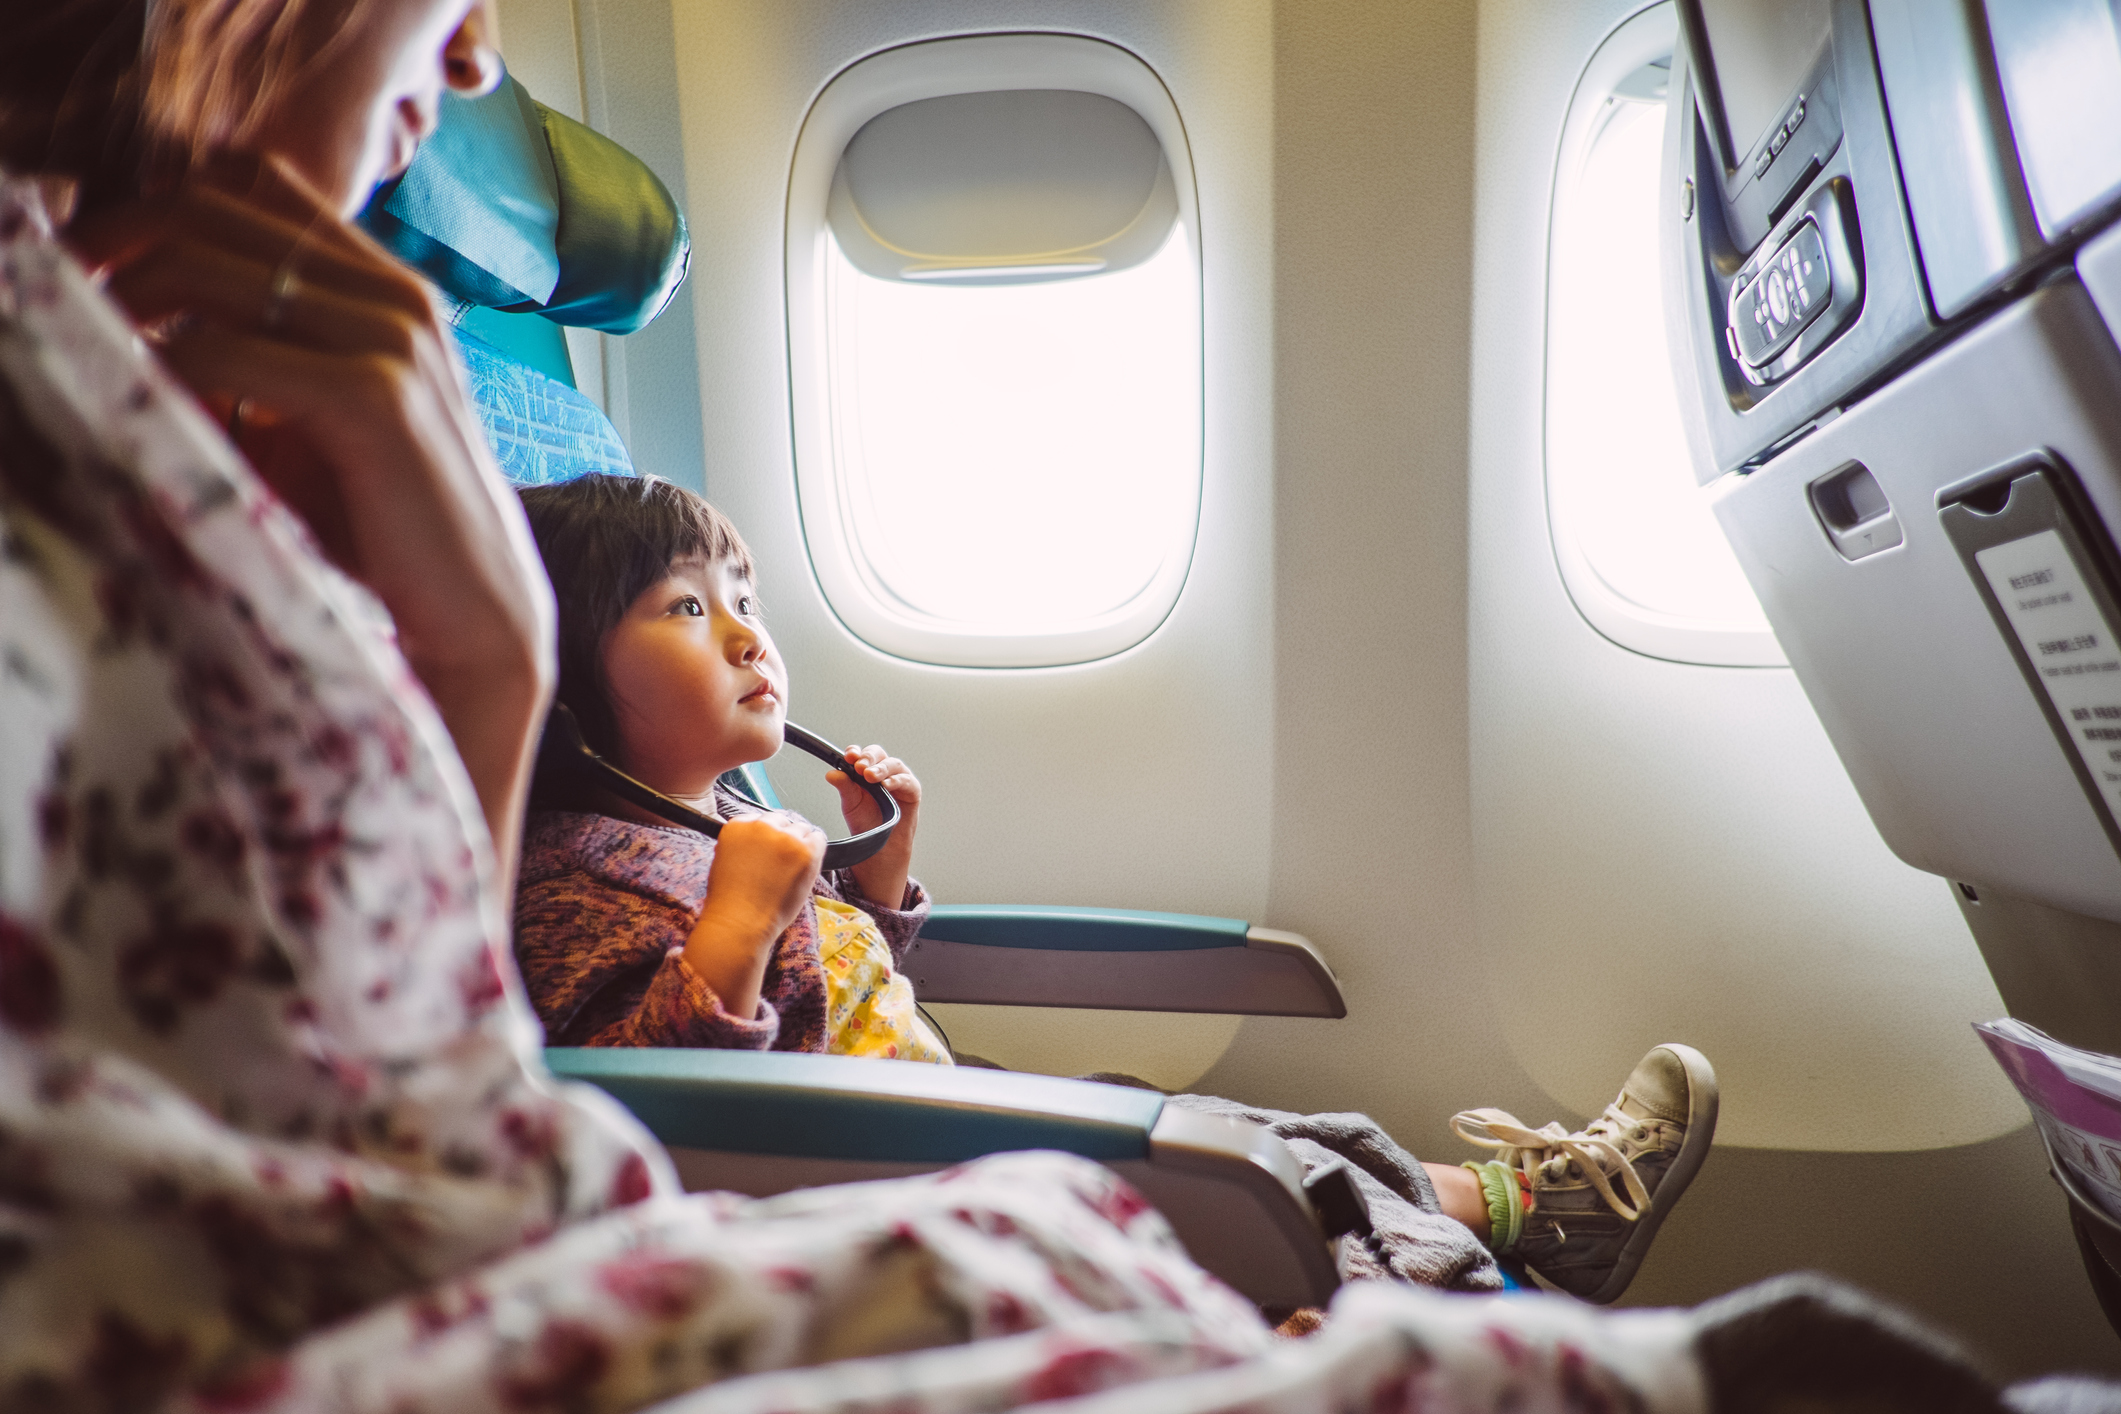 A child and mother sit in an airplane getting ready to leave for vacation